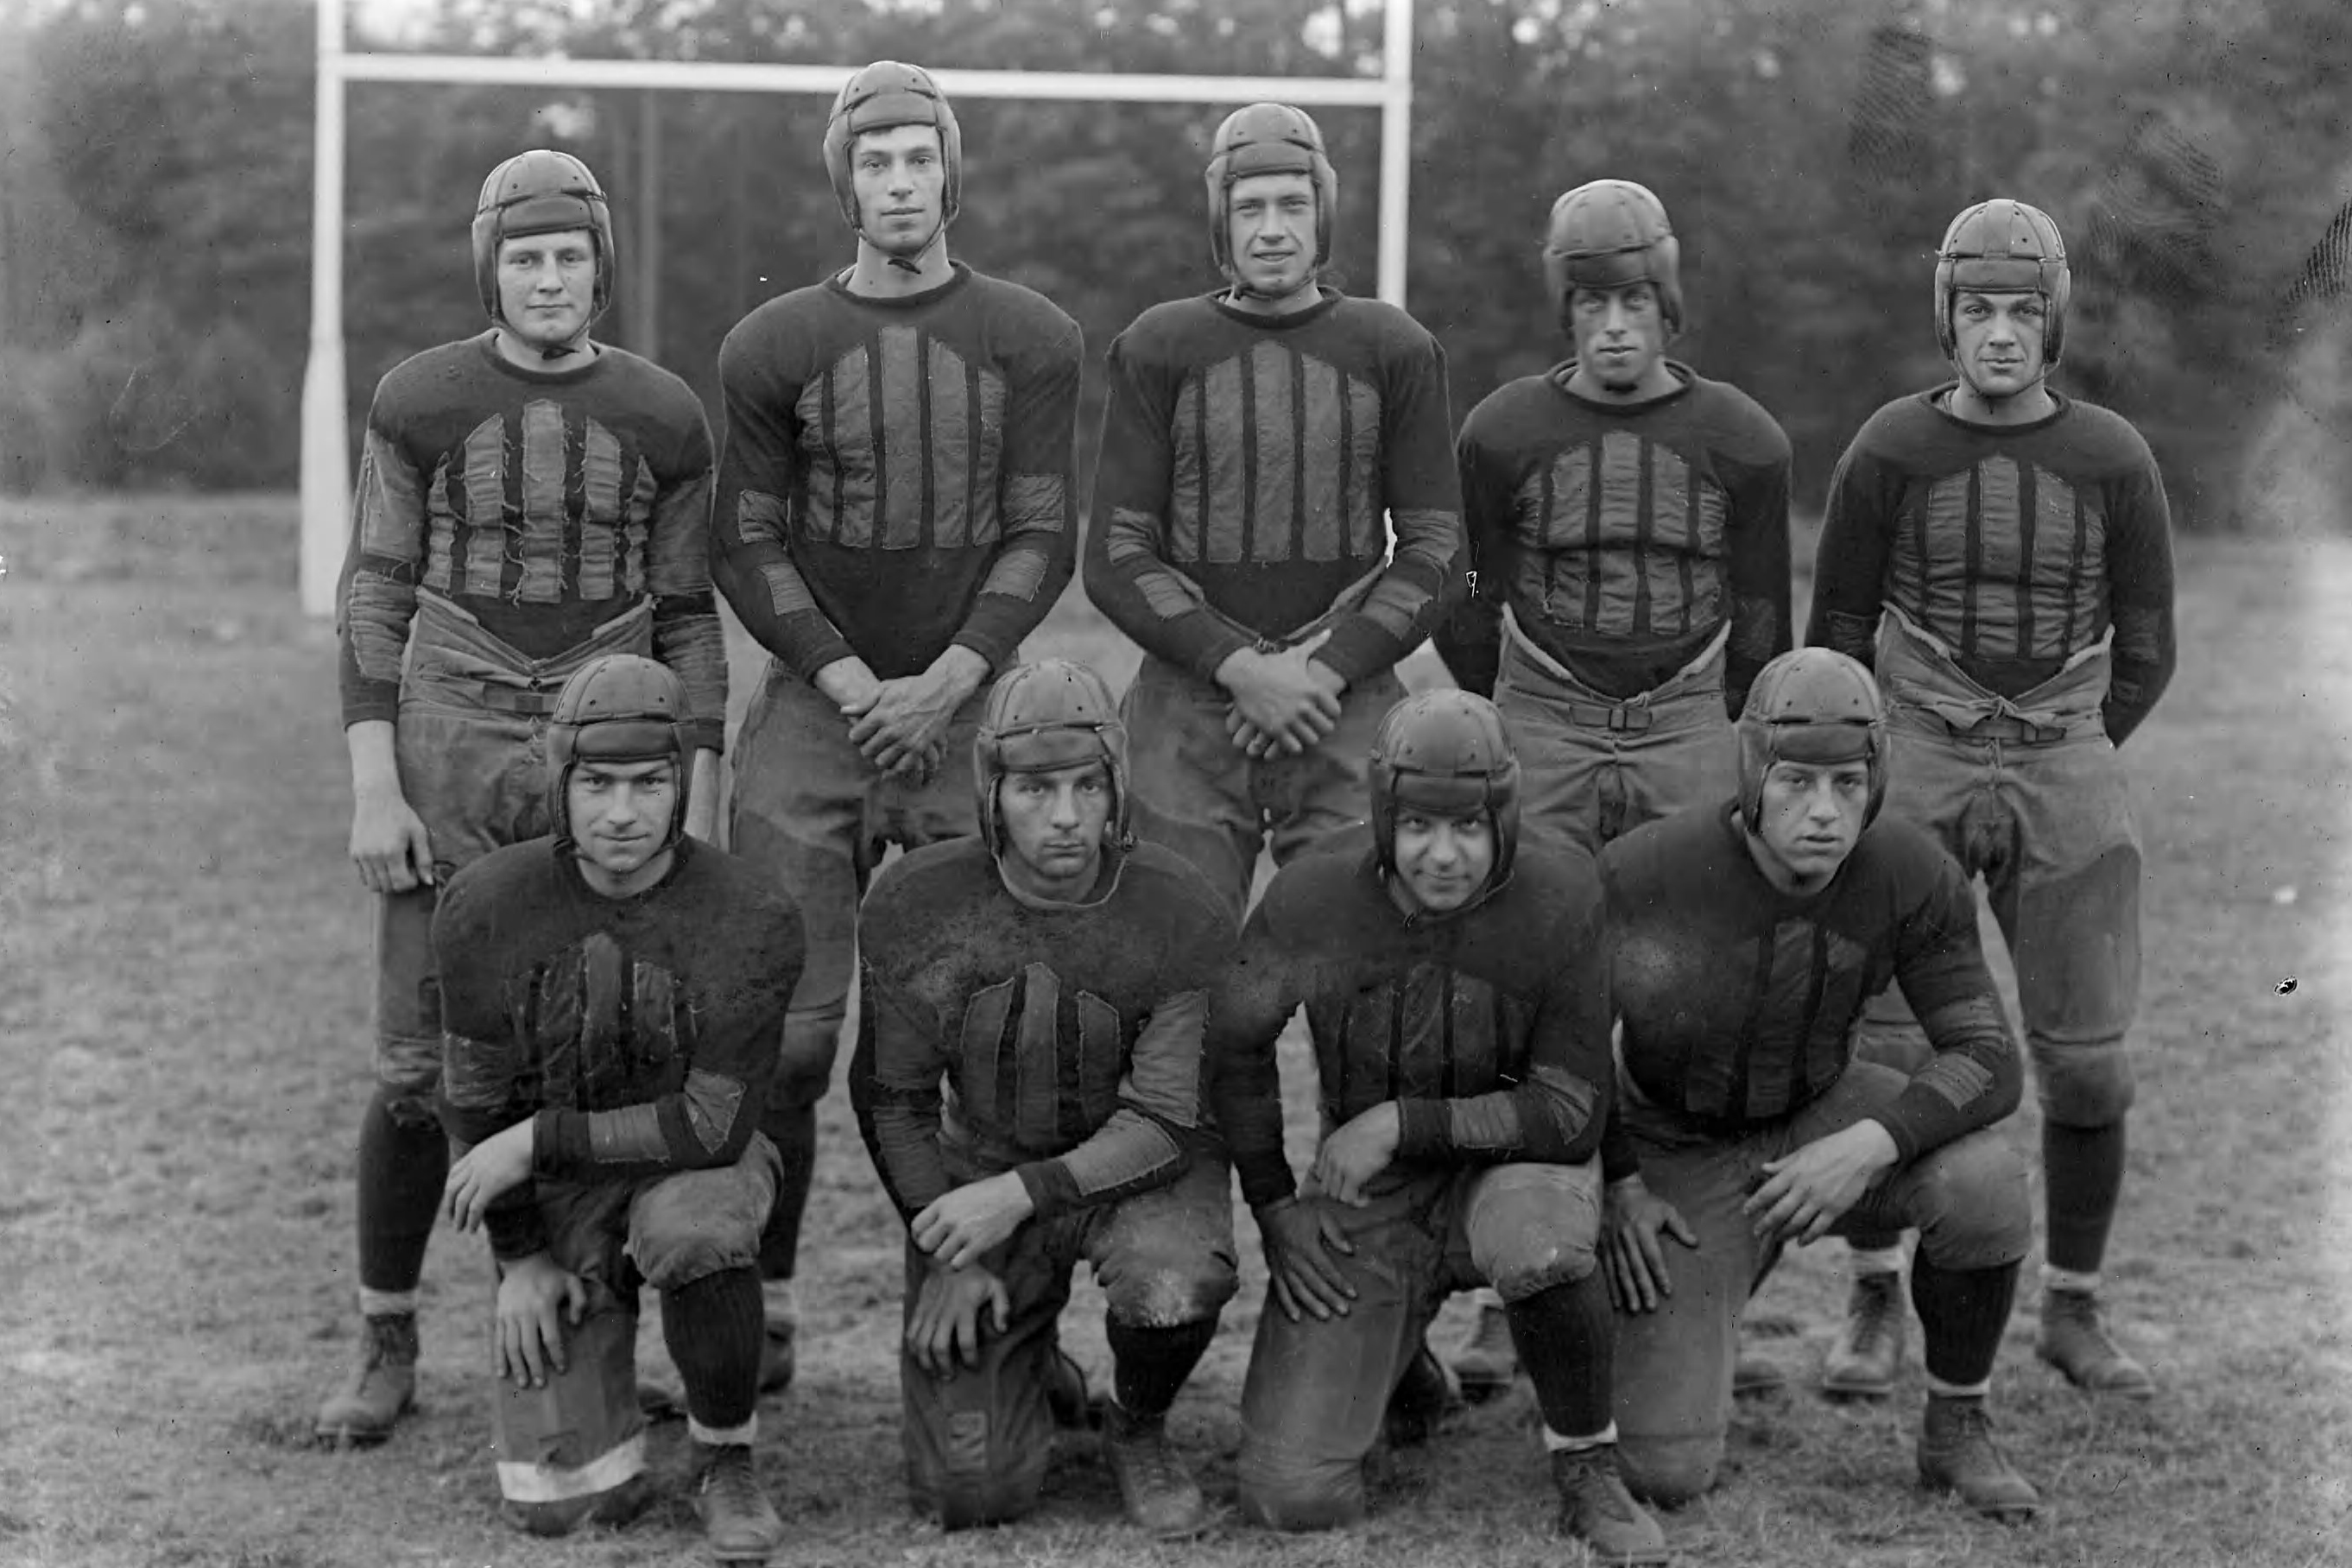 Nine players from the Connecticut Agricultural College football team, known as the 'Aggies,' in 1927.